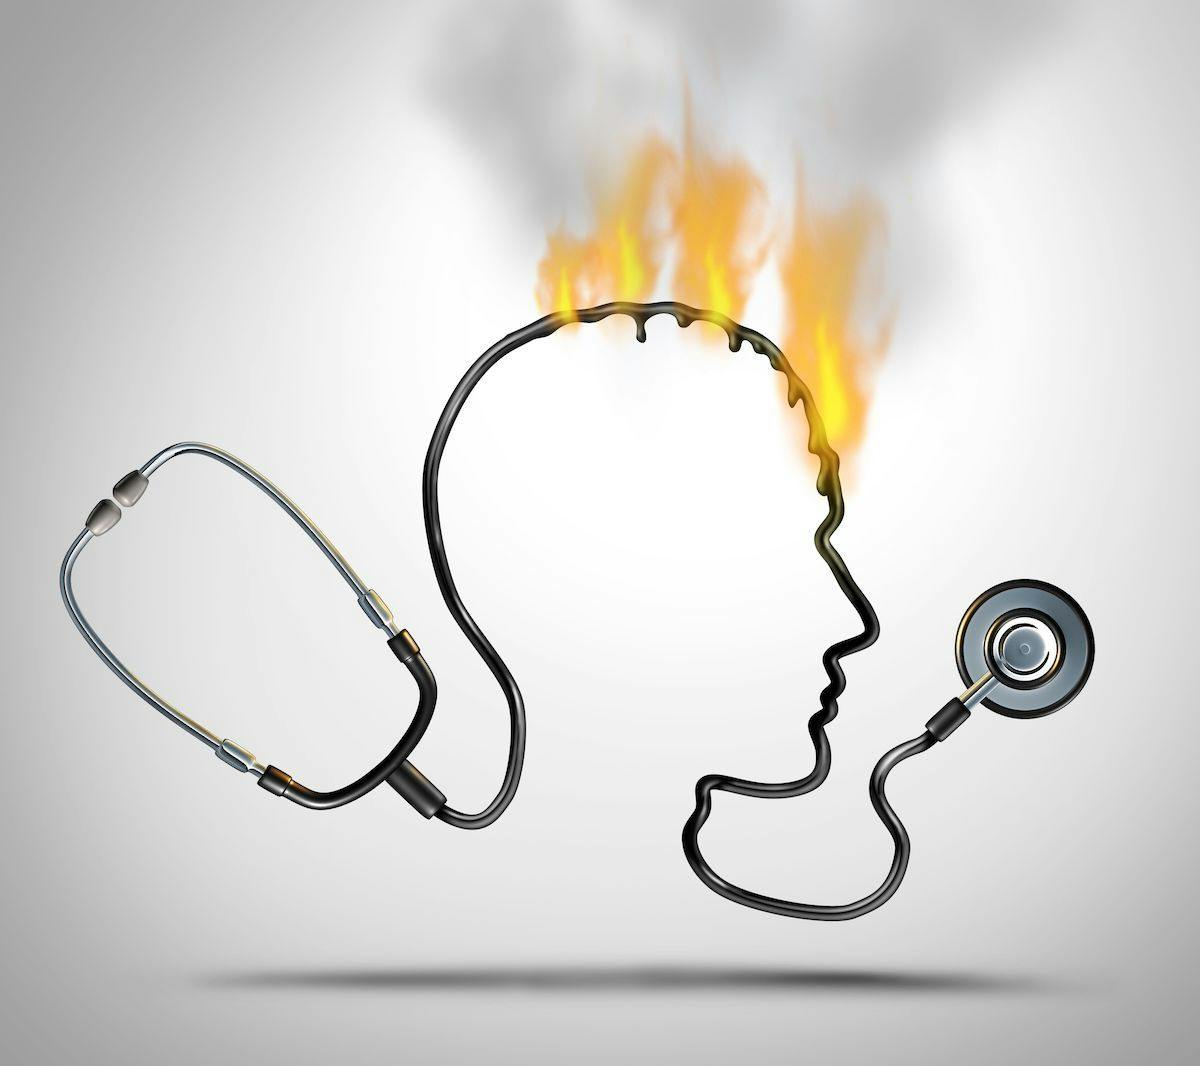 Addressing physician burnout: Three physician leaders discuss solutions